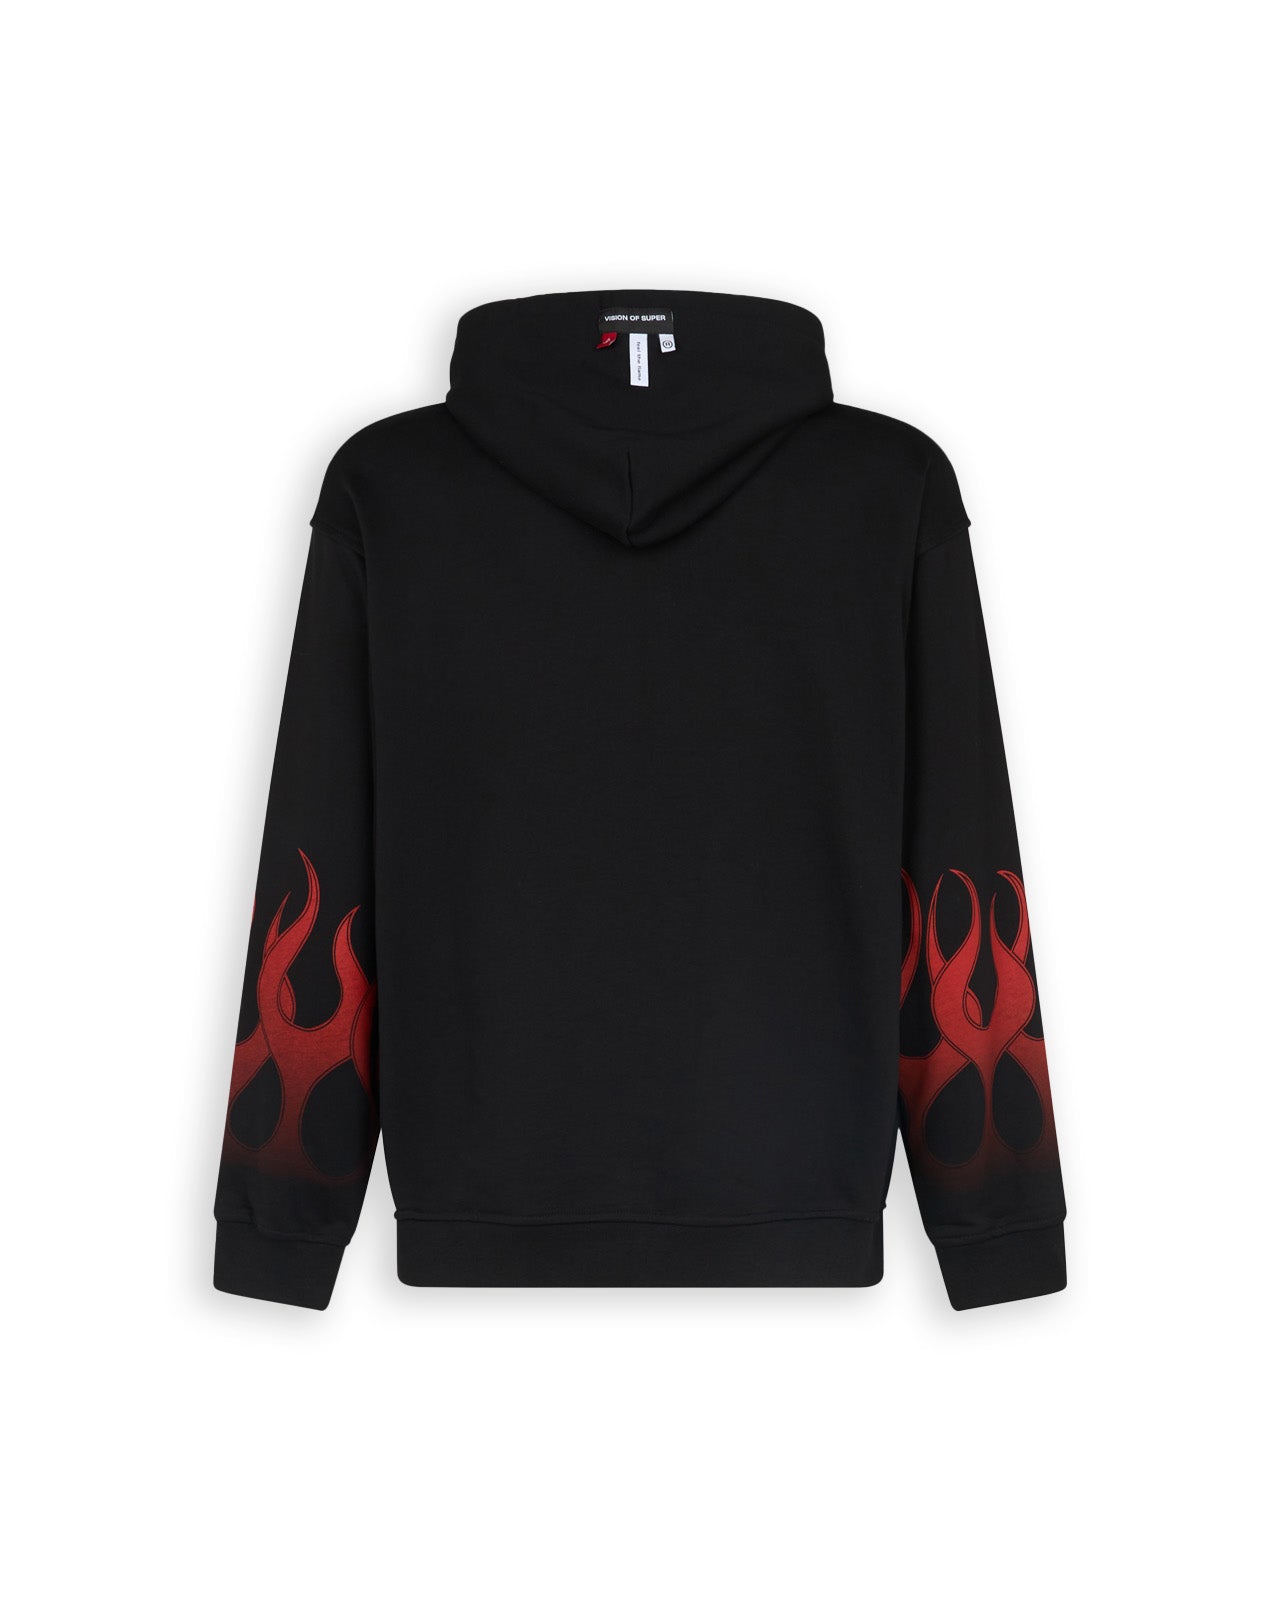 Vos Black Sweatshirt With Red Flames